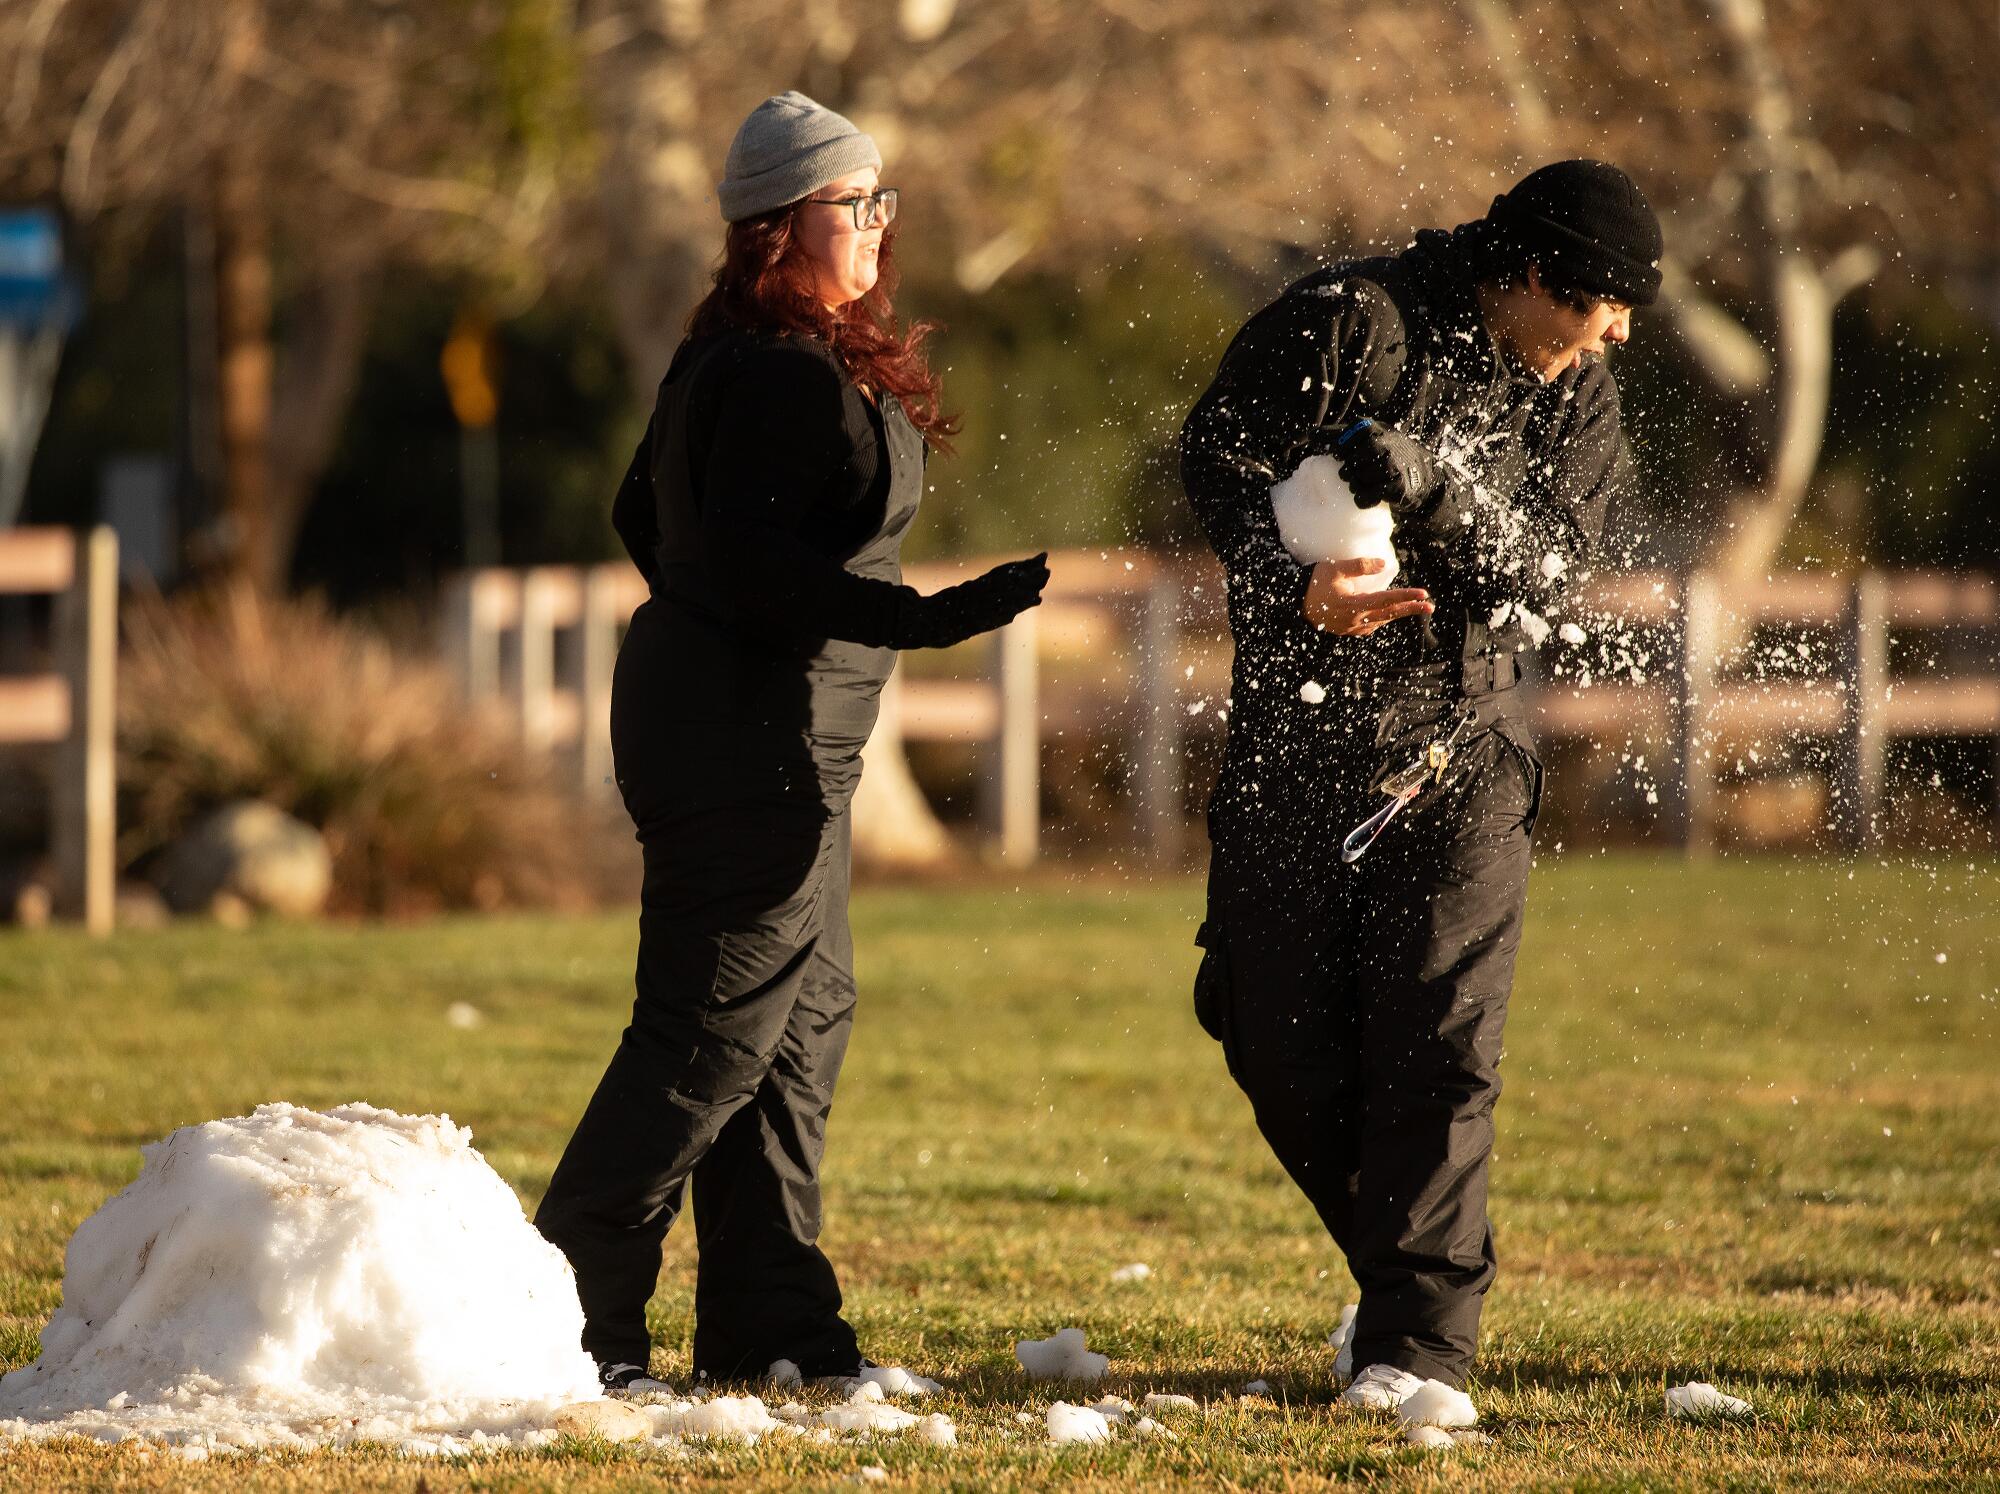 Carmen Meza lands a shot during a snowball fight with her boyfriend, using a small remaining pile of snow on a grassy field.